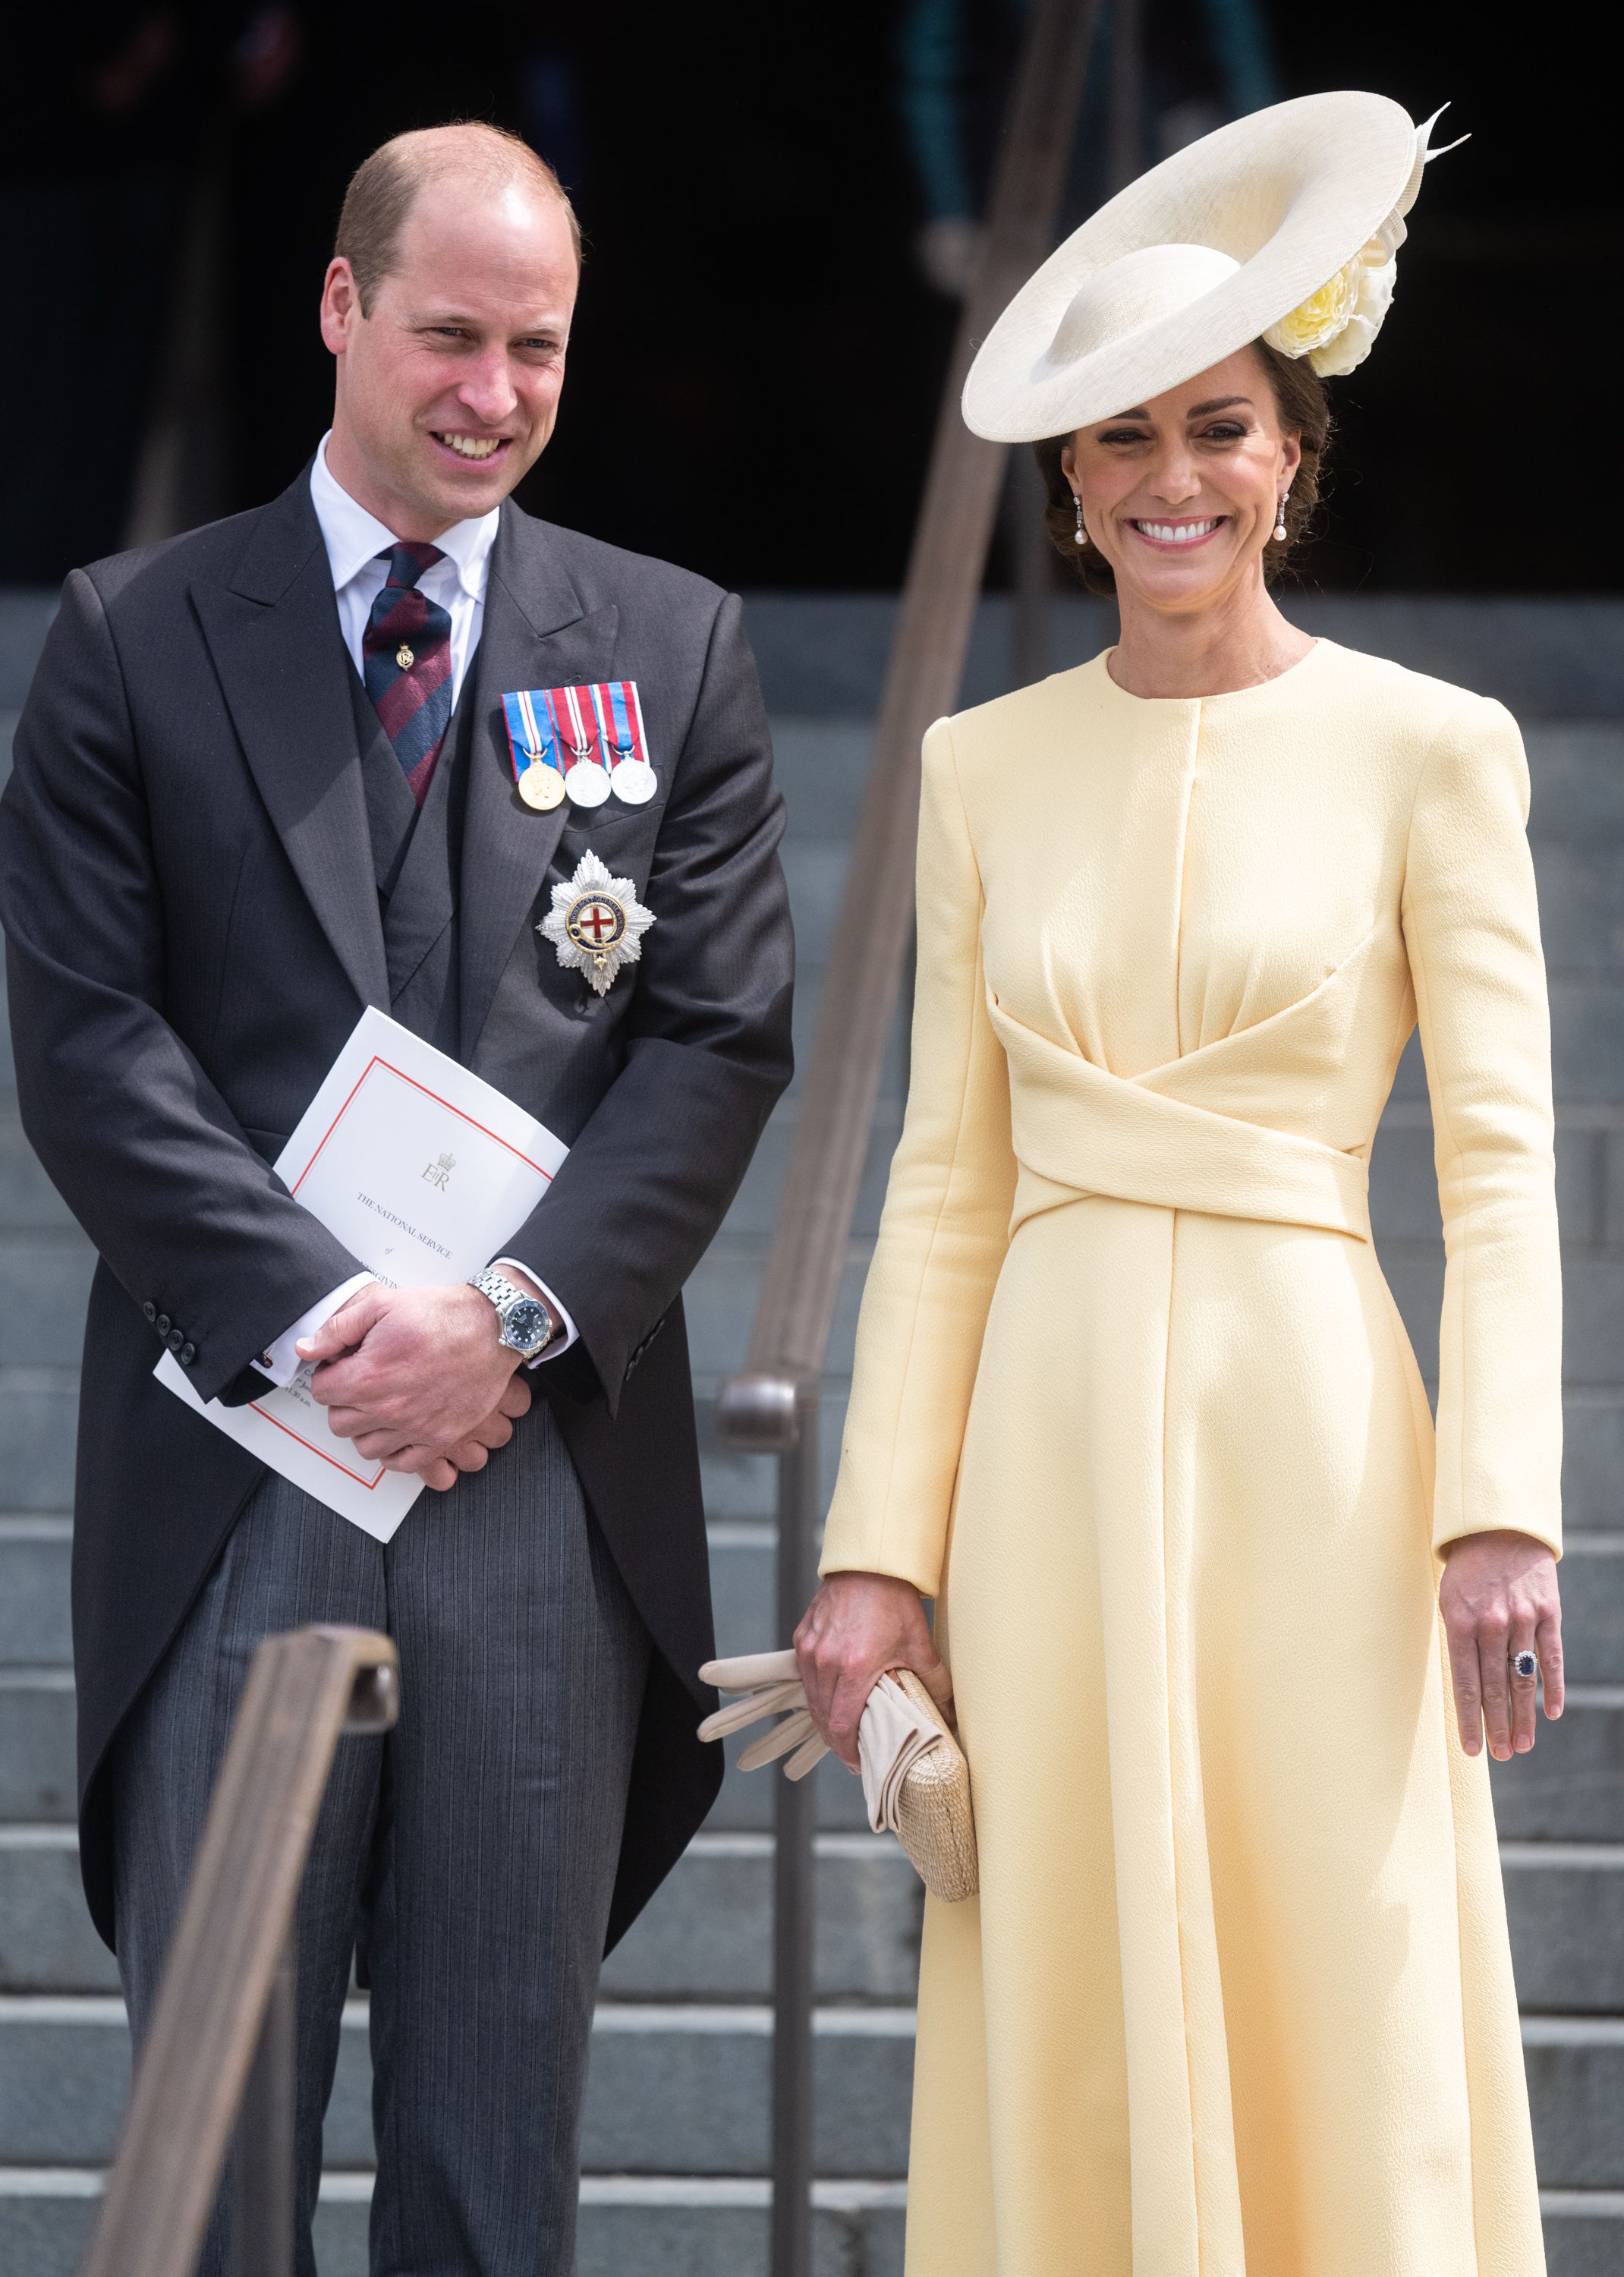 Kate Middleton Responds To Comment About Her Making A Great Princess of Wales